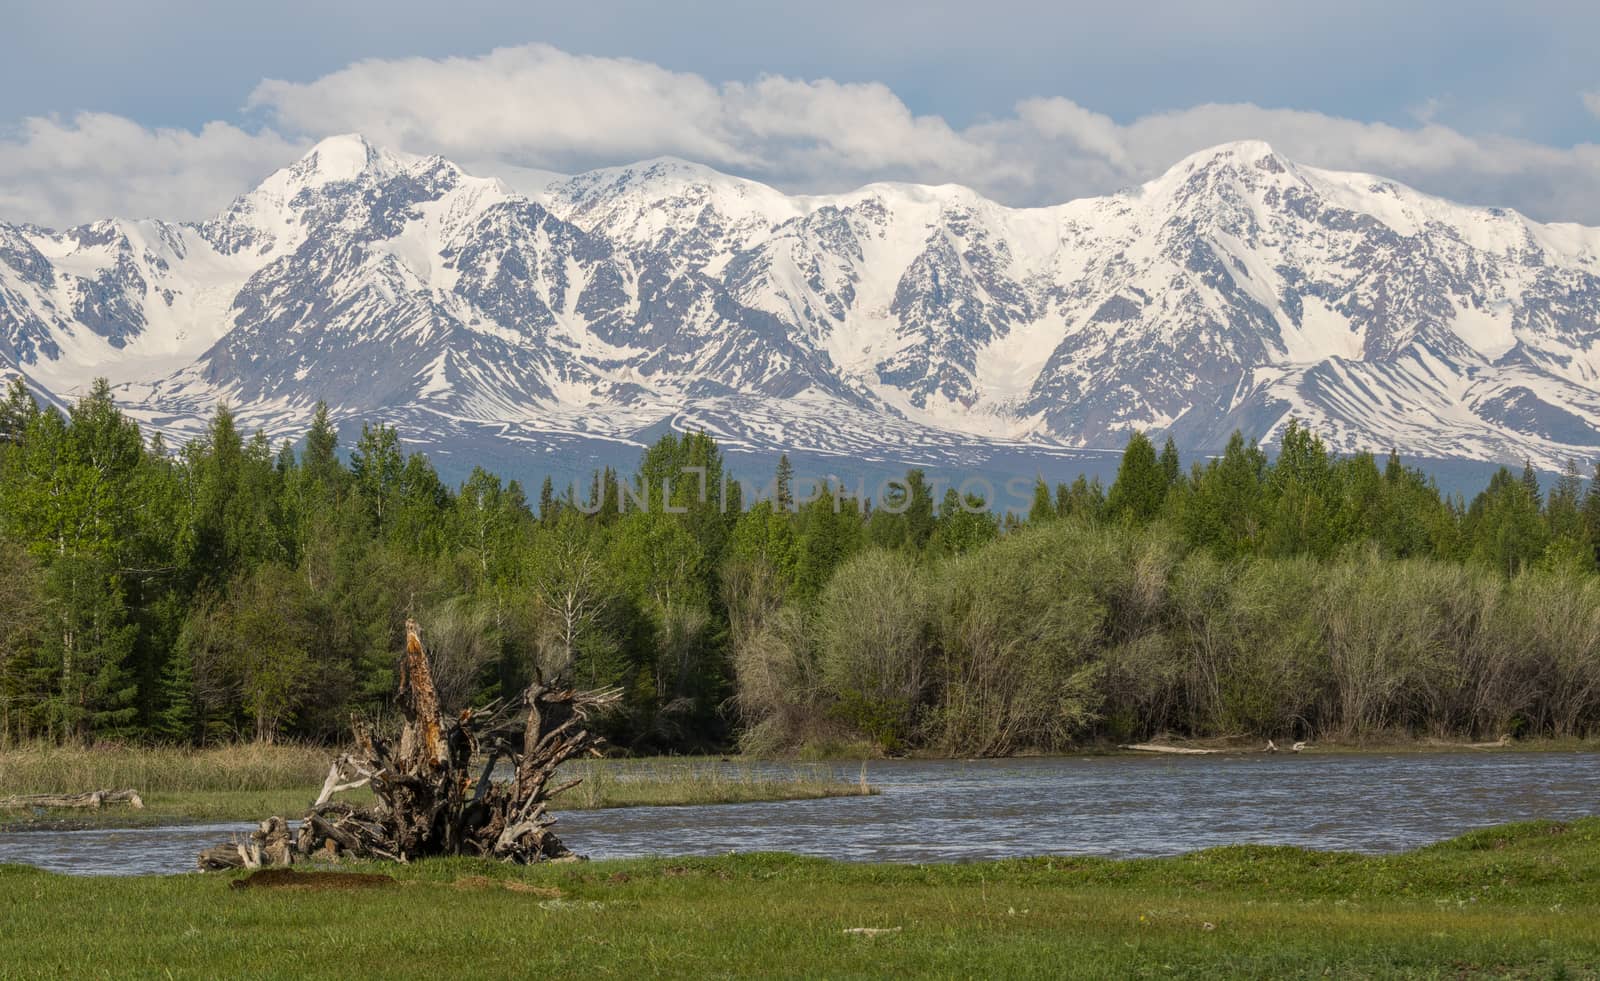 The mountain river, against the woody mountains, originating from a thawing glacier. Western Siberia, Altai mountains.